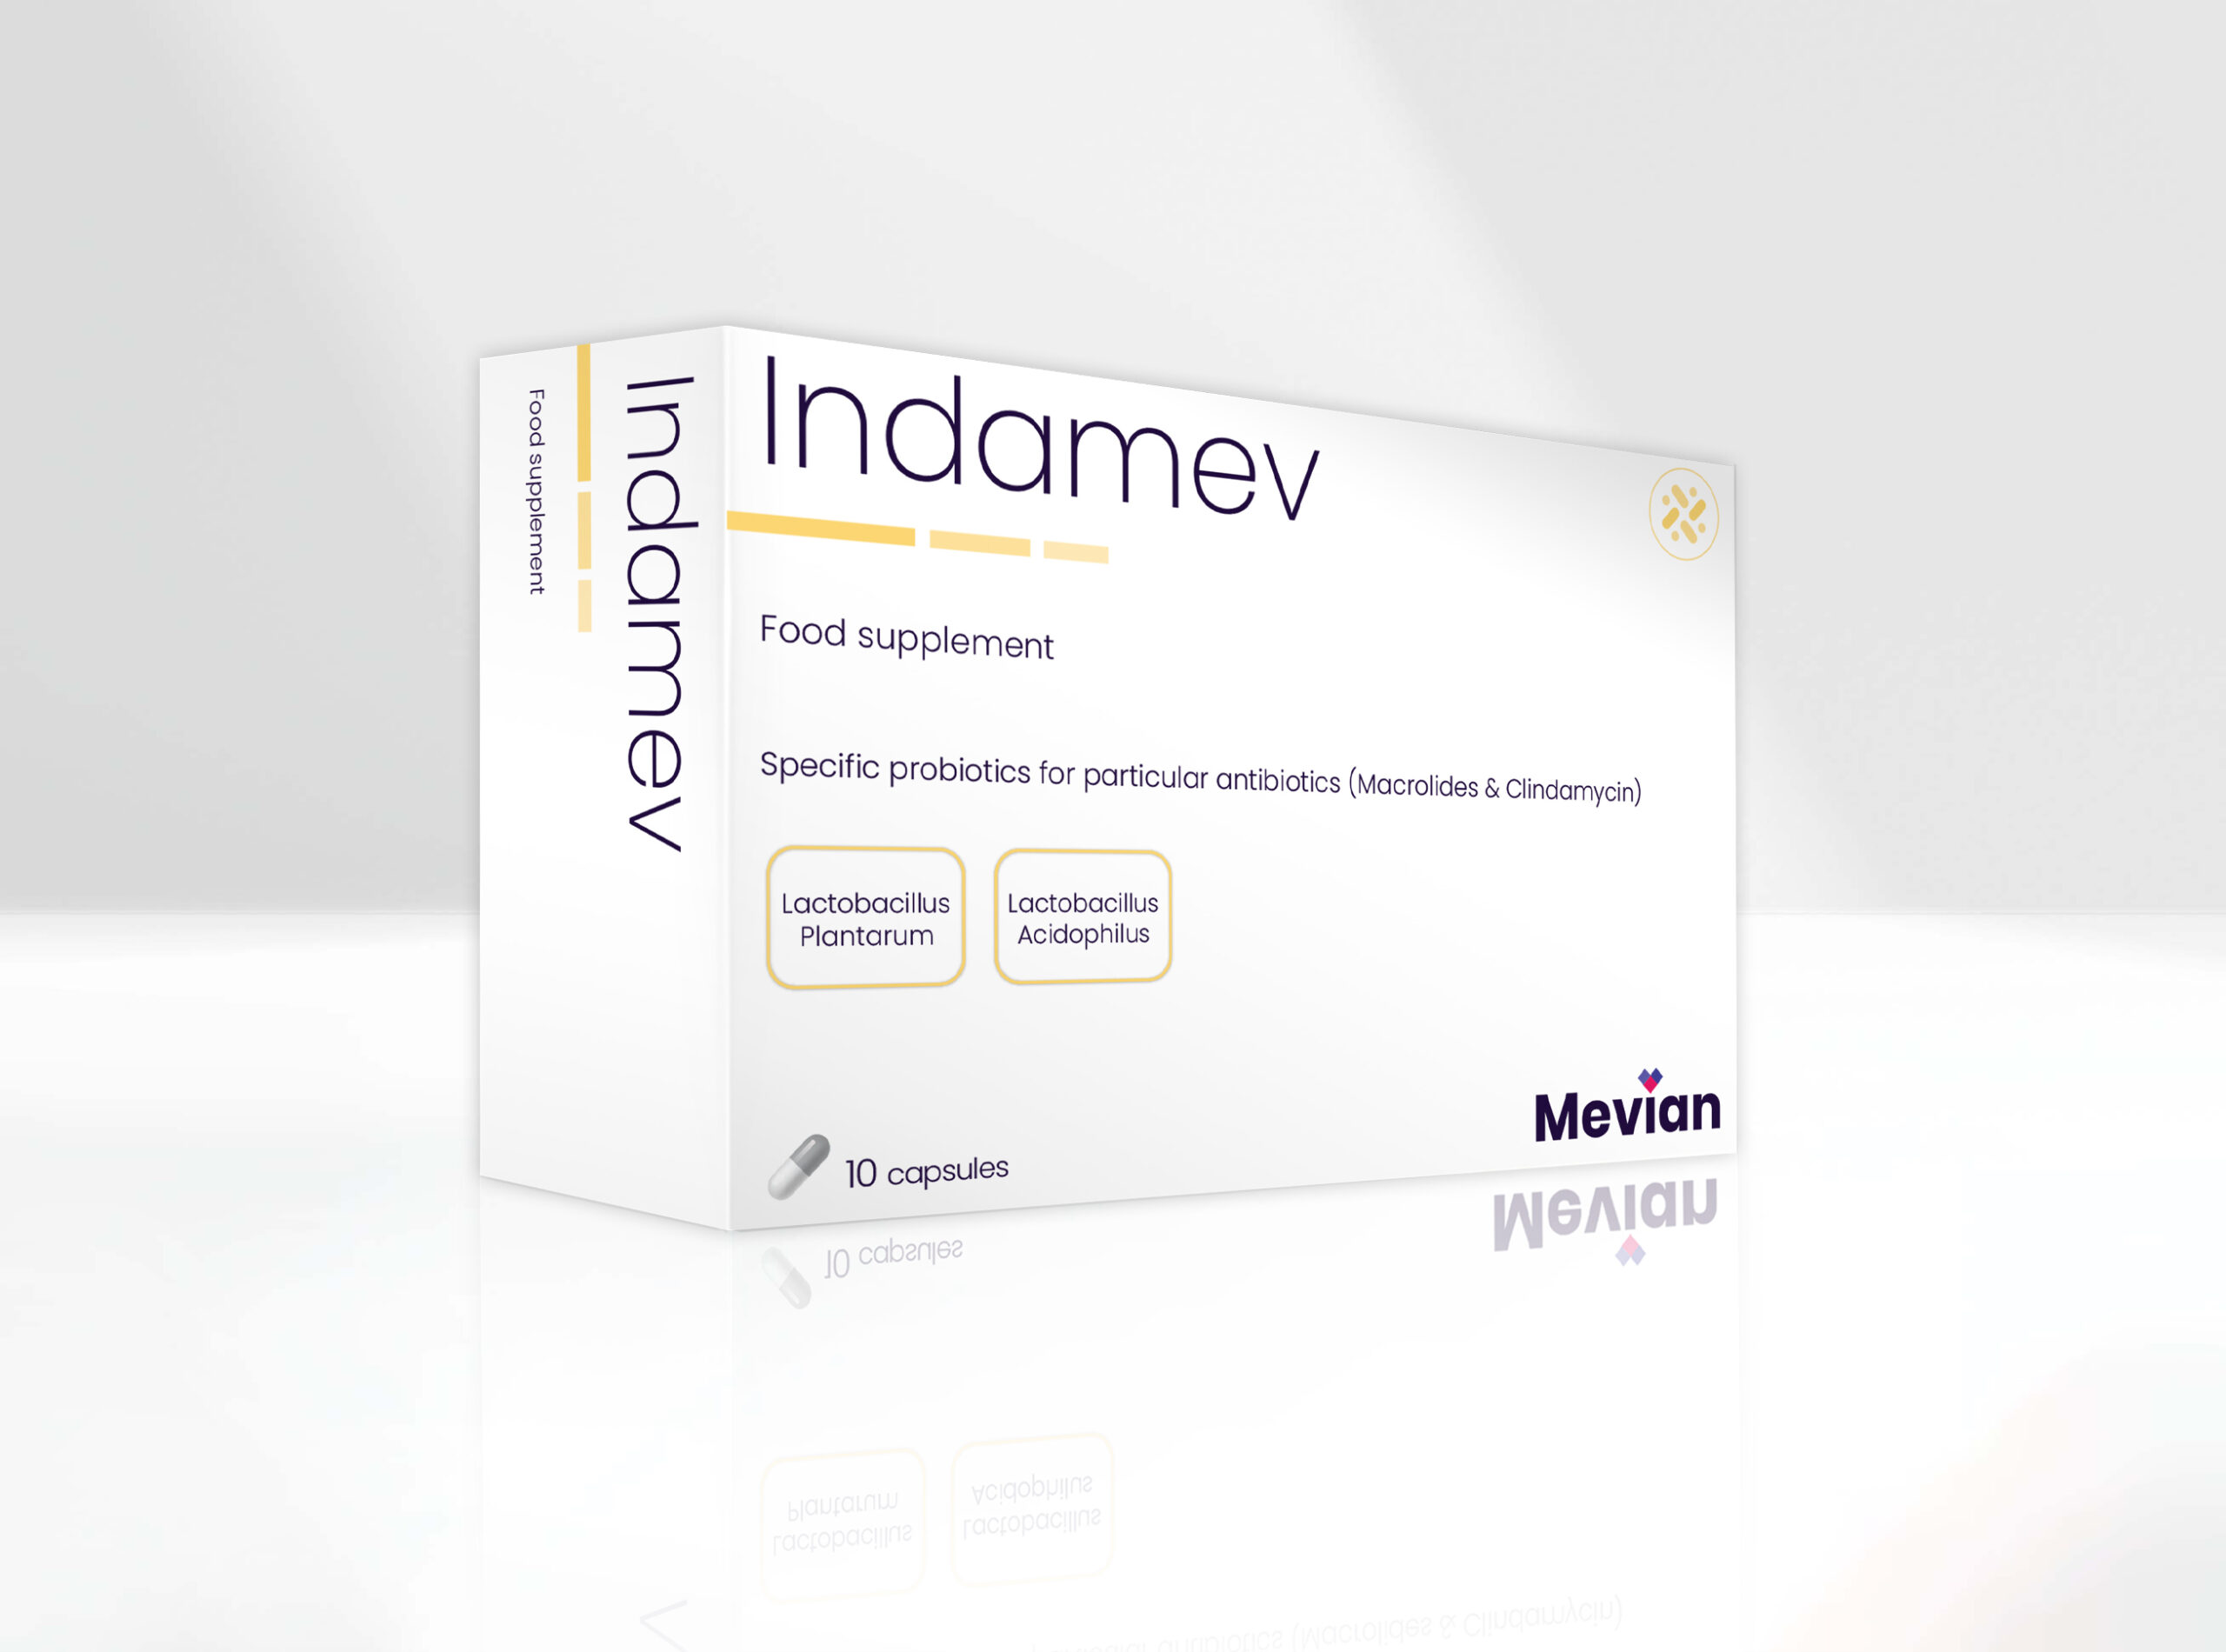 Indamev is a novel approach in Antibiotic Associated Diarrhoea with strains selected for a particular group of antibiotics (Macrolides & Clindamycin) based on probiotic strains' sensitivity to antibiotic activity.